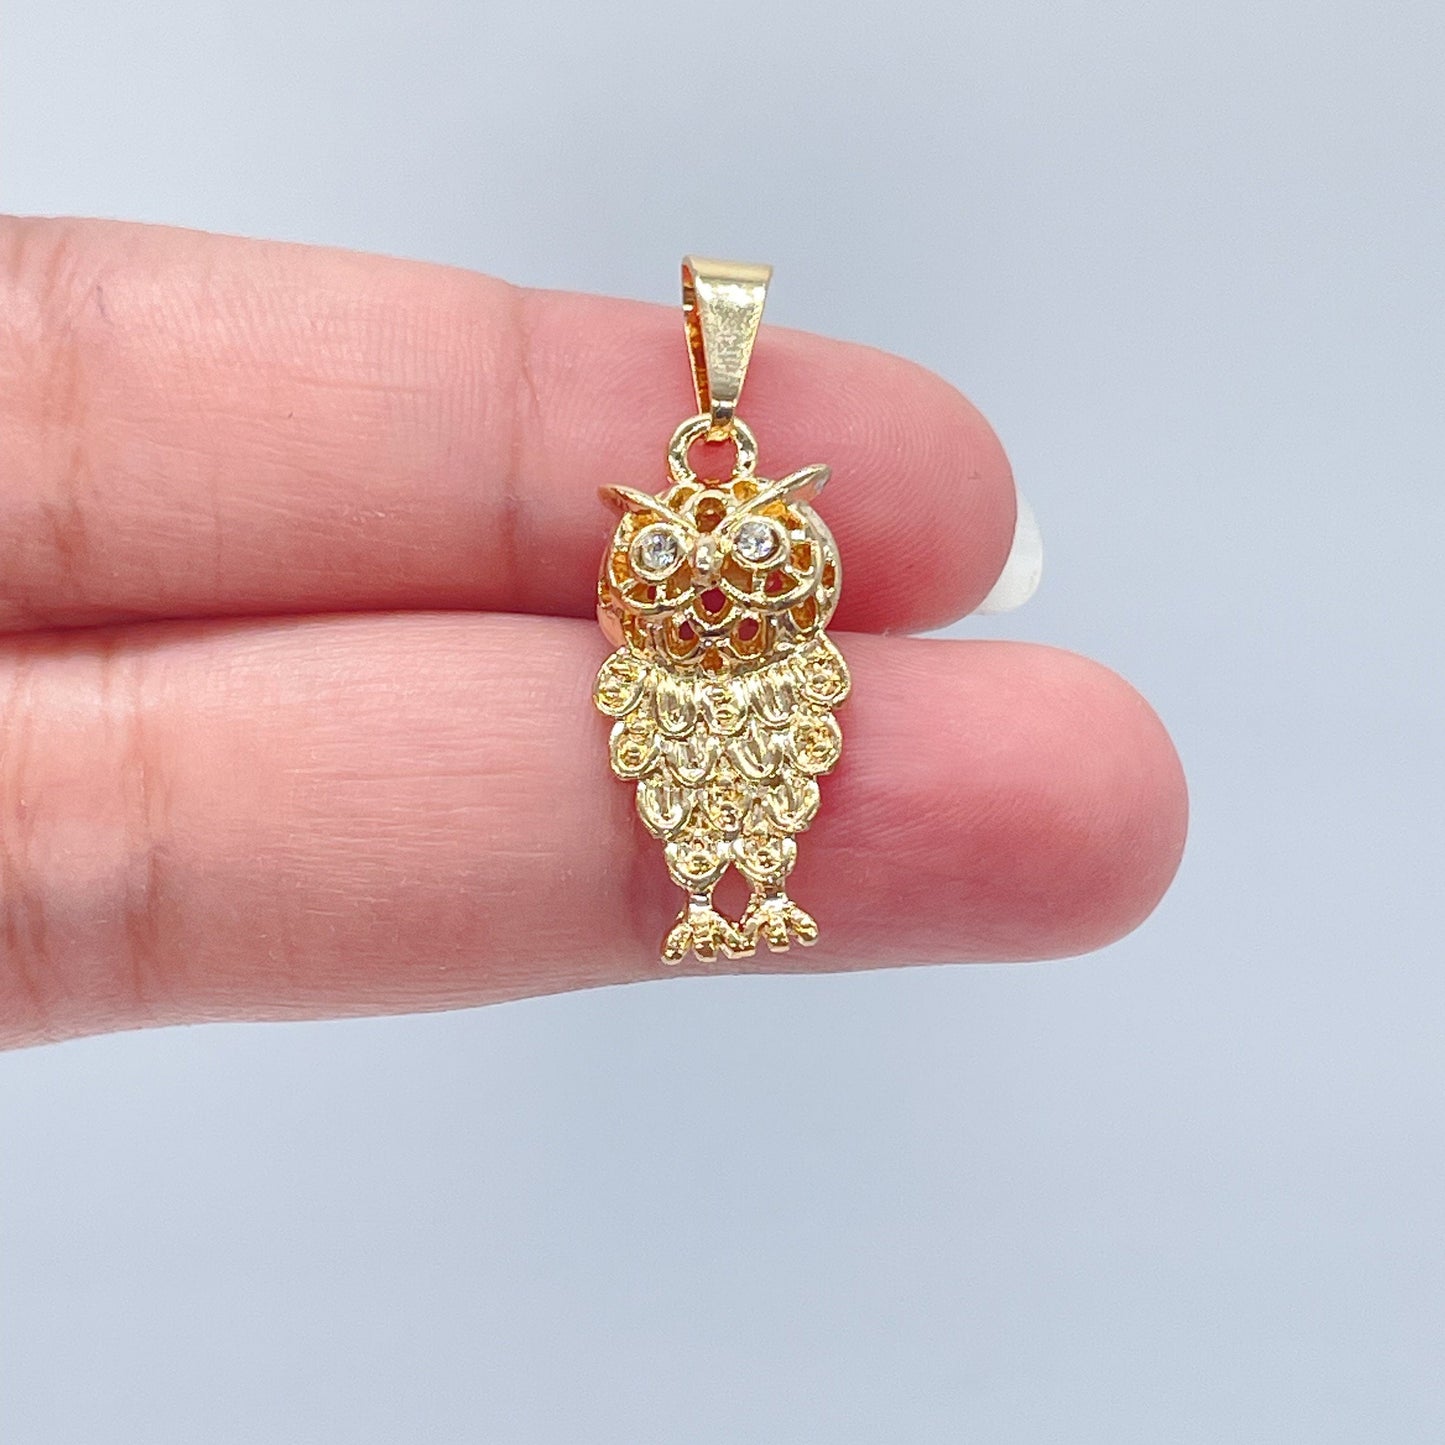 18k Gold Layered Owl Charm Featuring Cubic Zirconia Eyes For Wholesale And